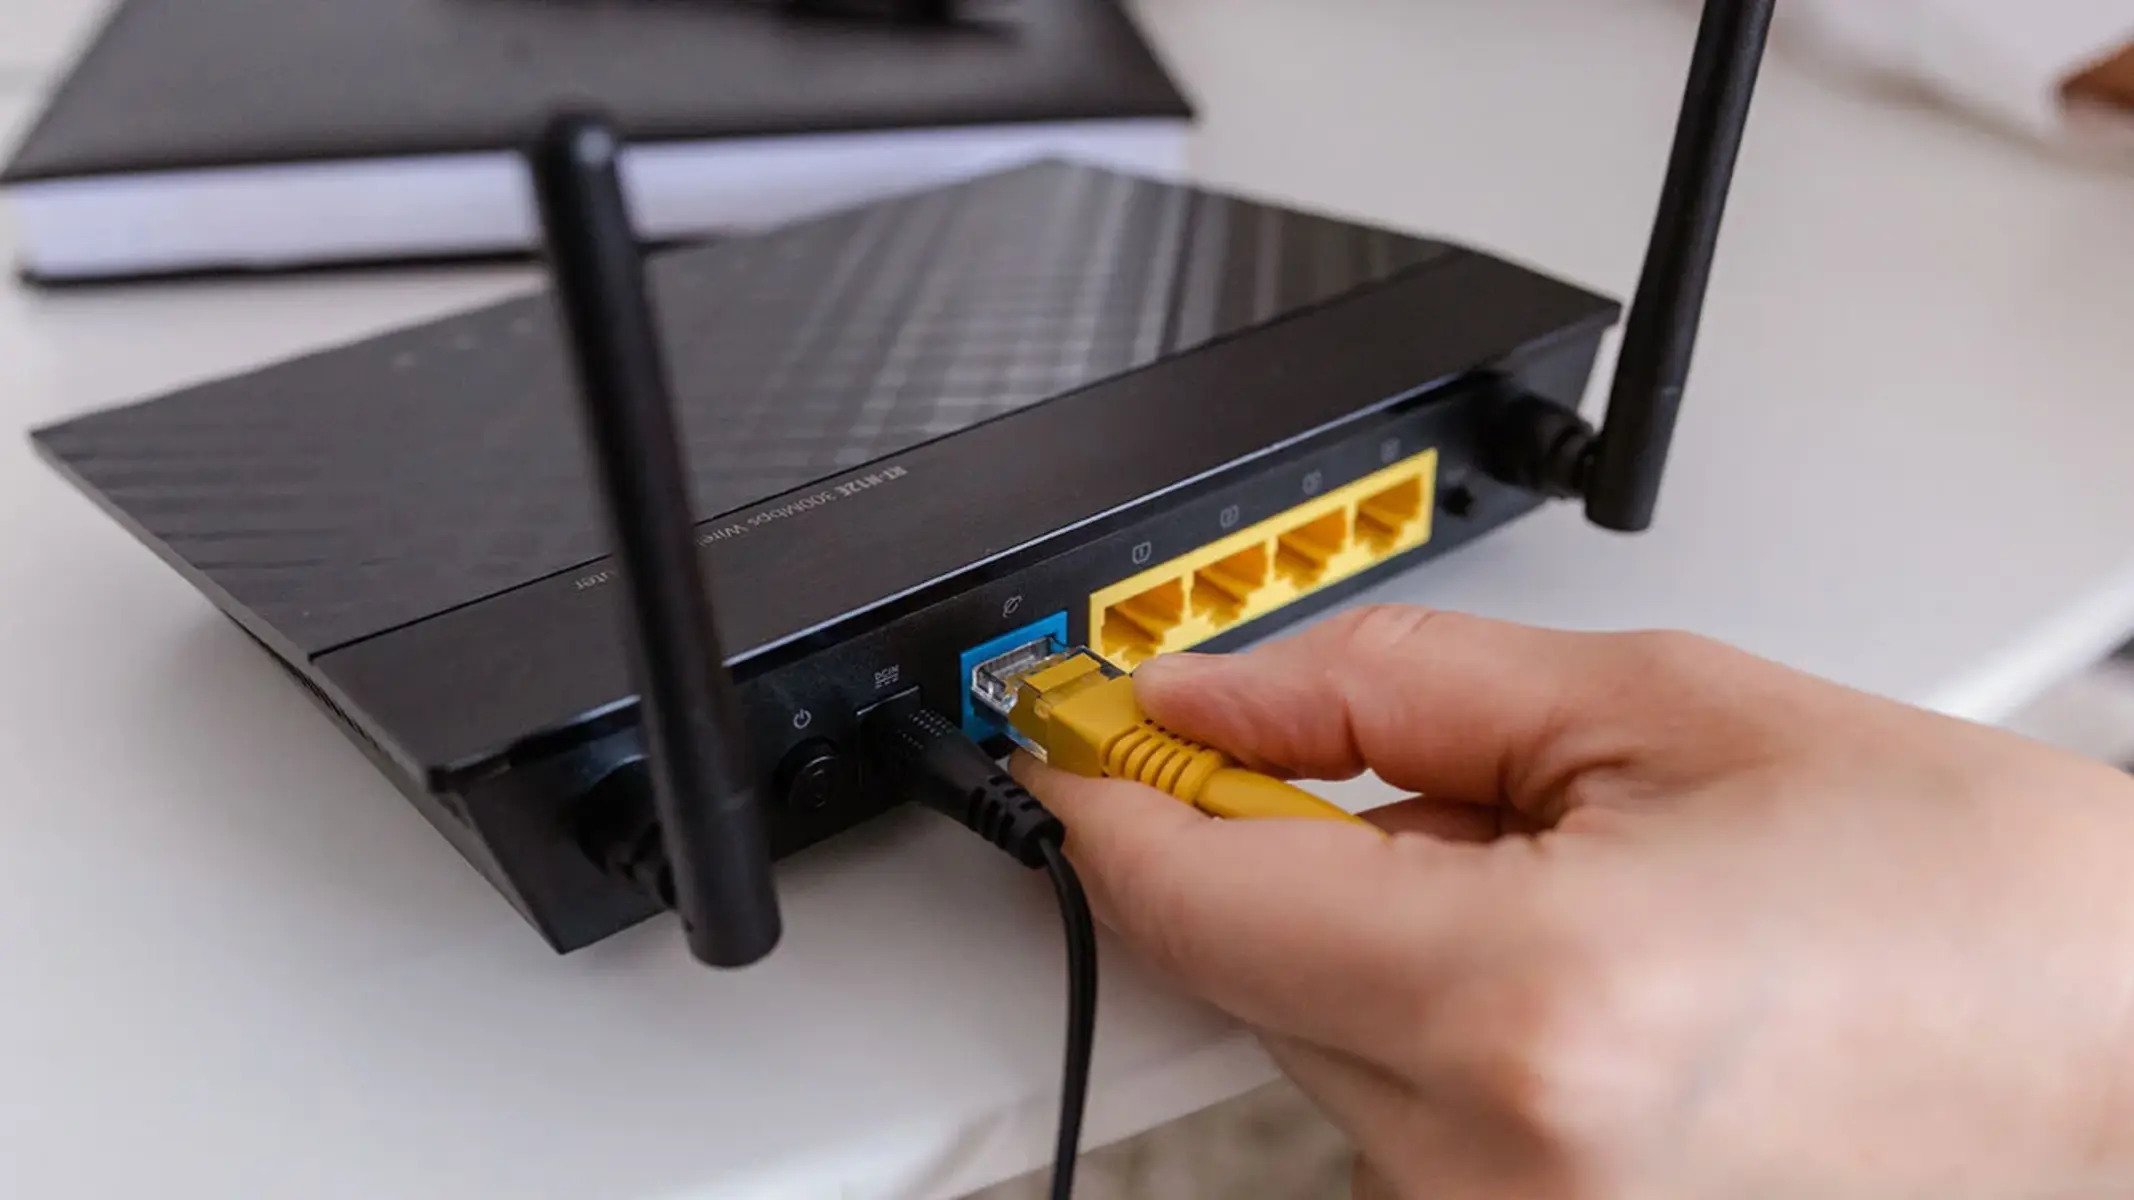 Connecting Hotspot To Router: Step-by-Step Guide